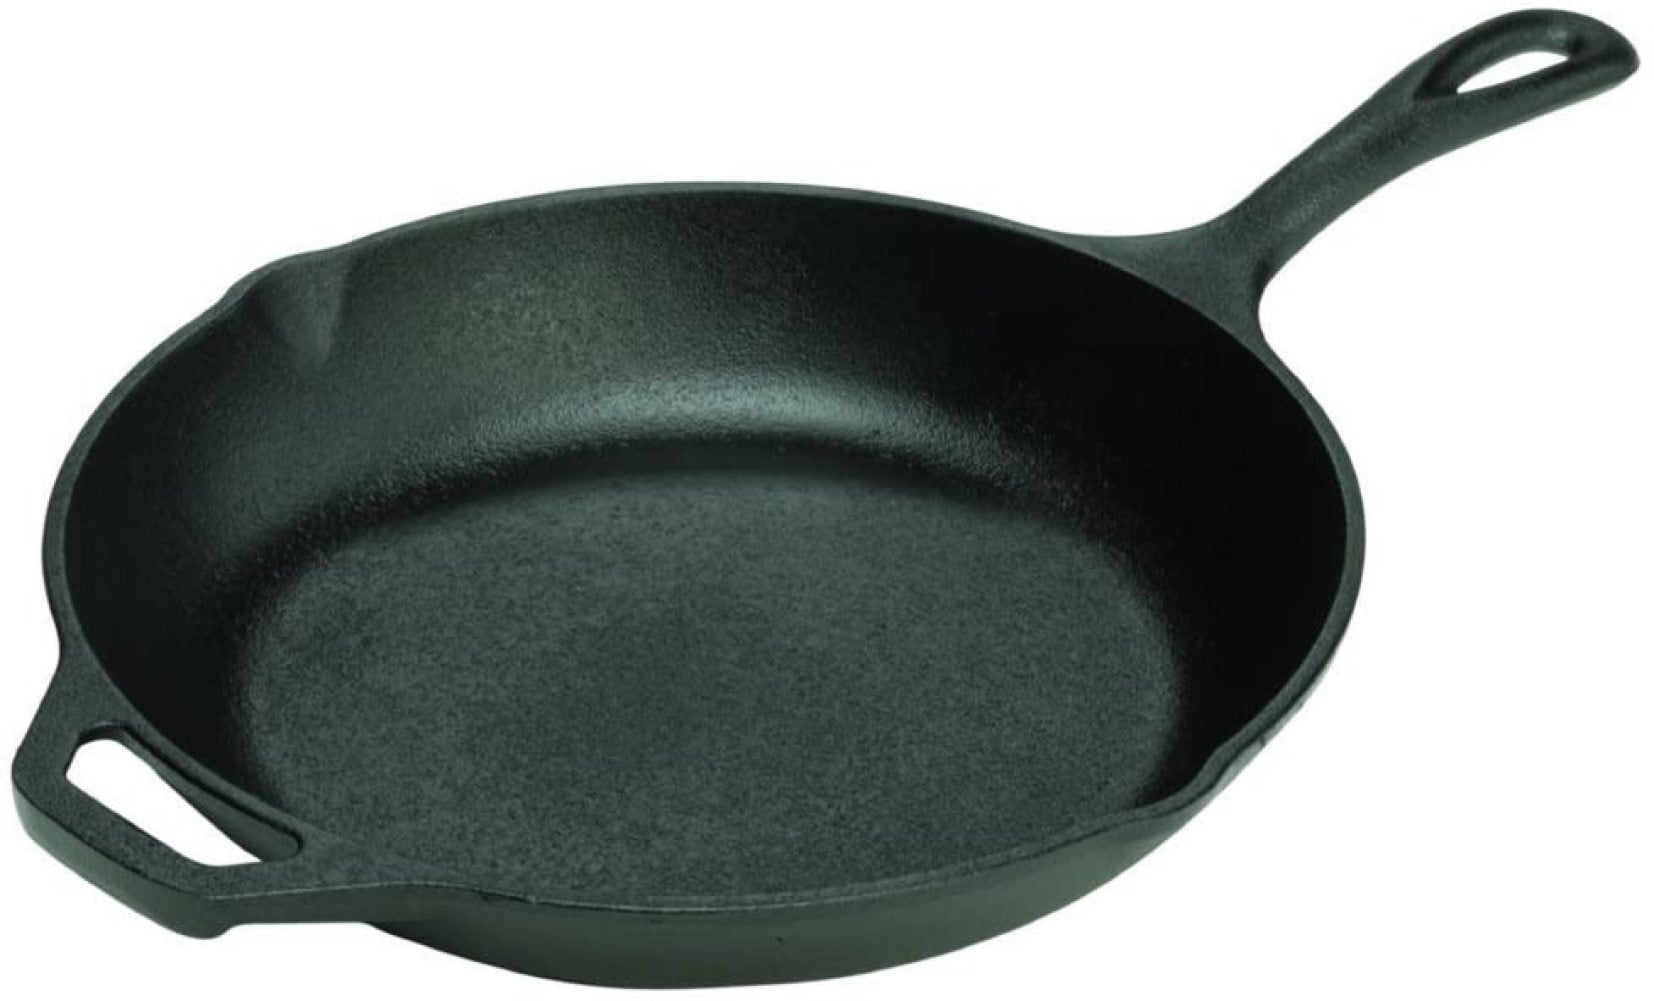 Lodge 10 Inch Cast Iron Chef Skillet Pre-Seasoned Cast Iron Pan with Sloped Edges for Sautes and Stir Fry. 